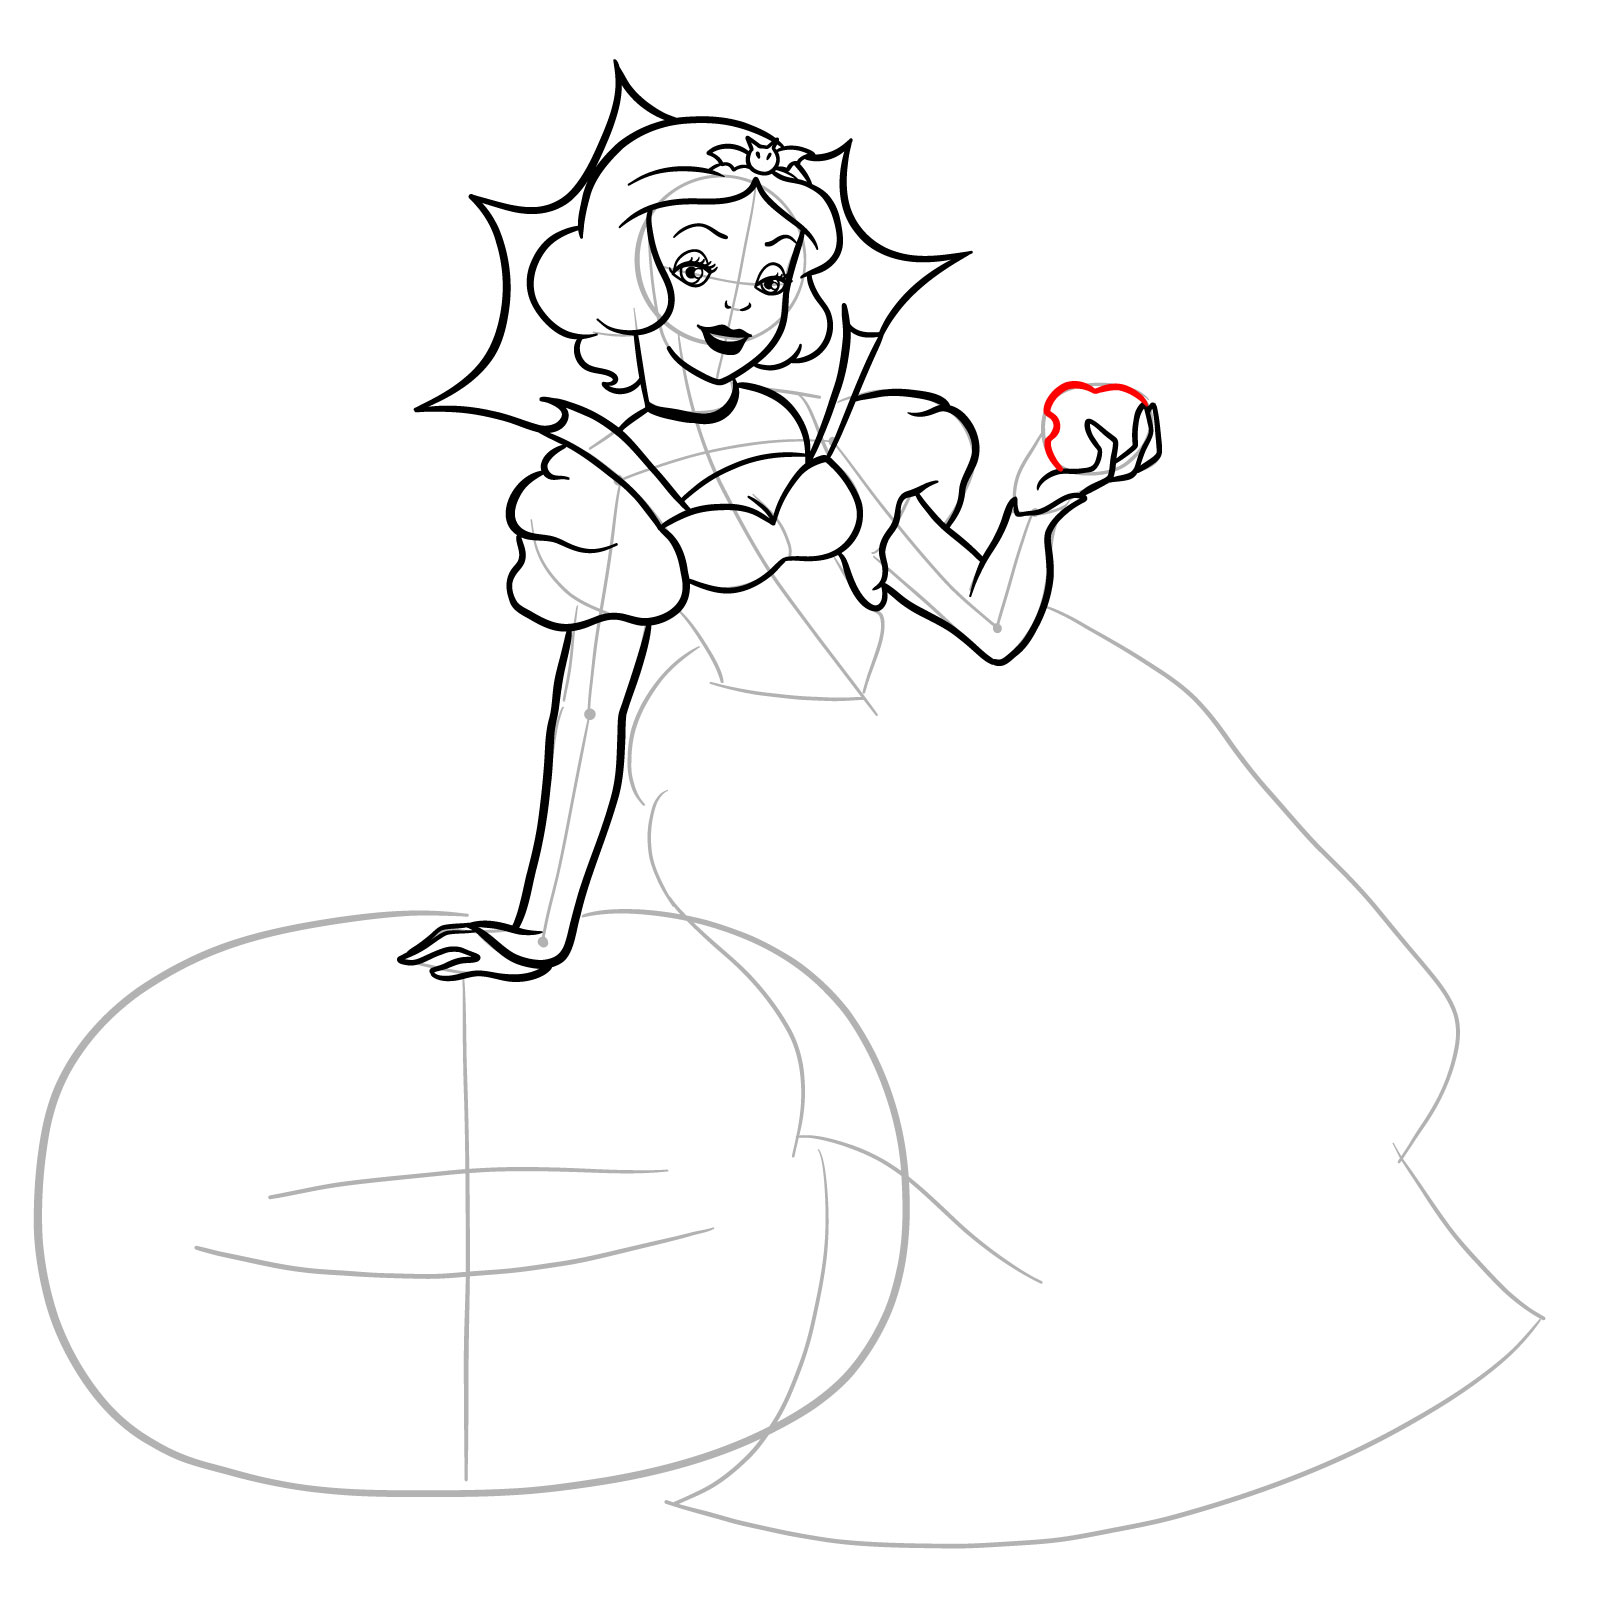 How to Draw Halloween Snow White - step 21